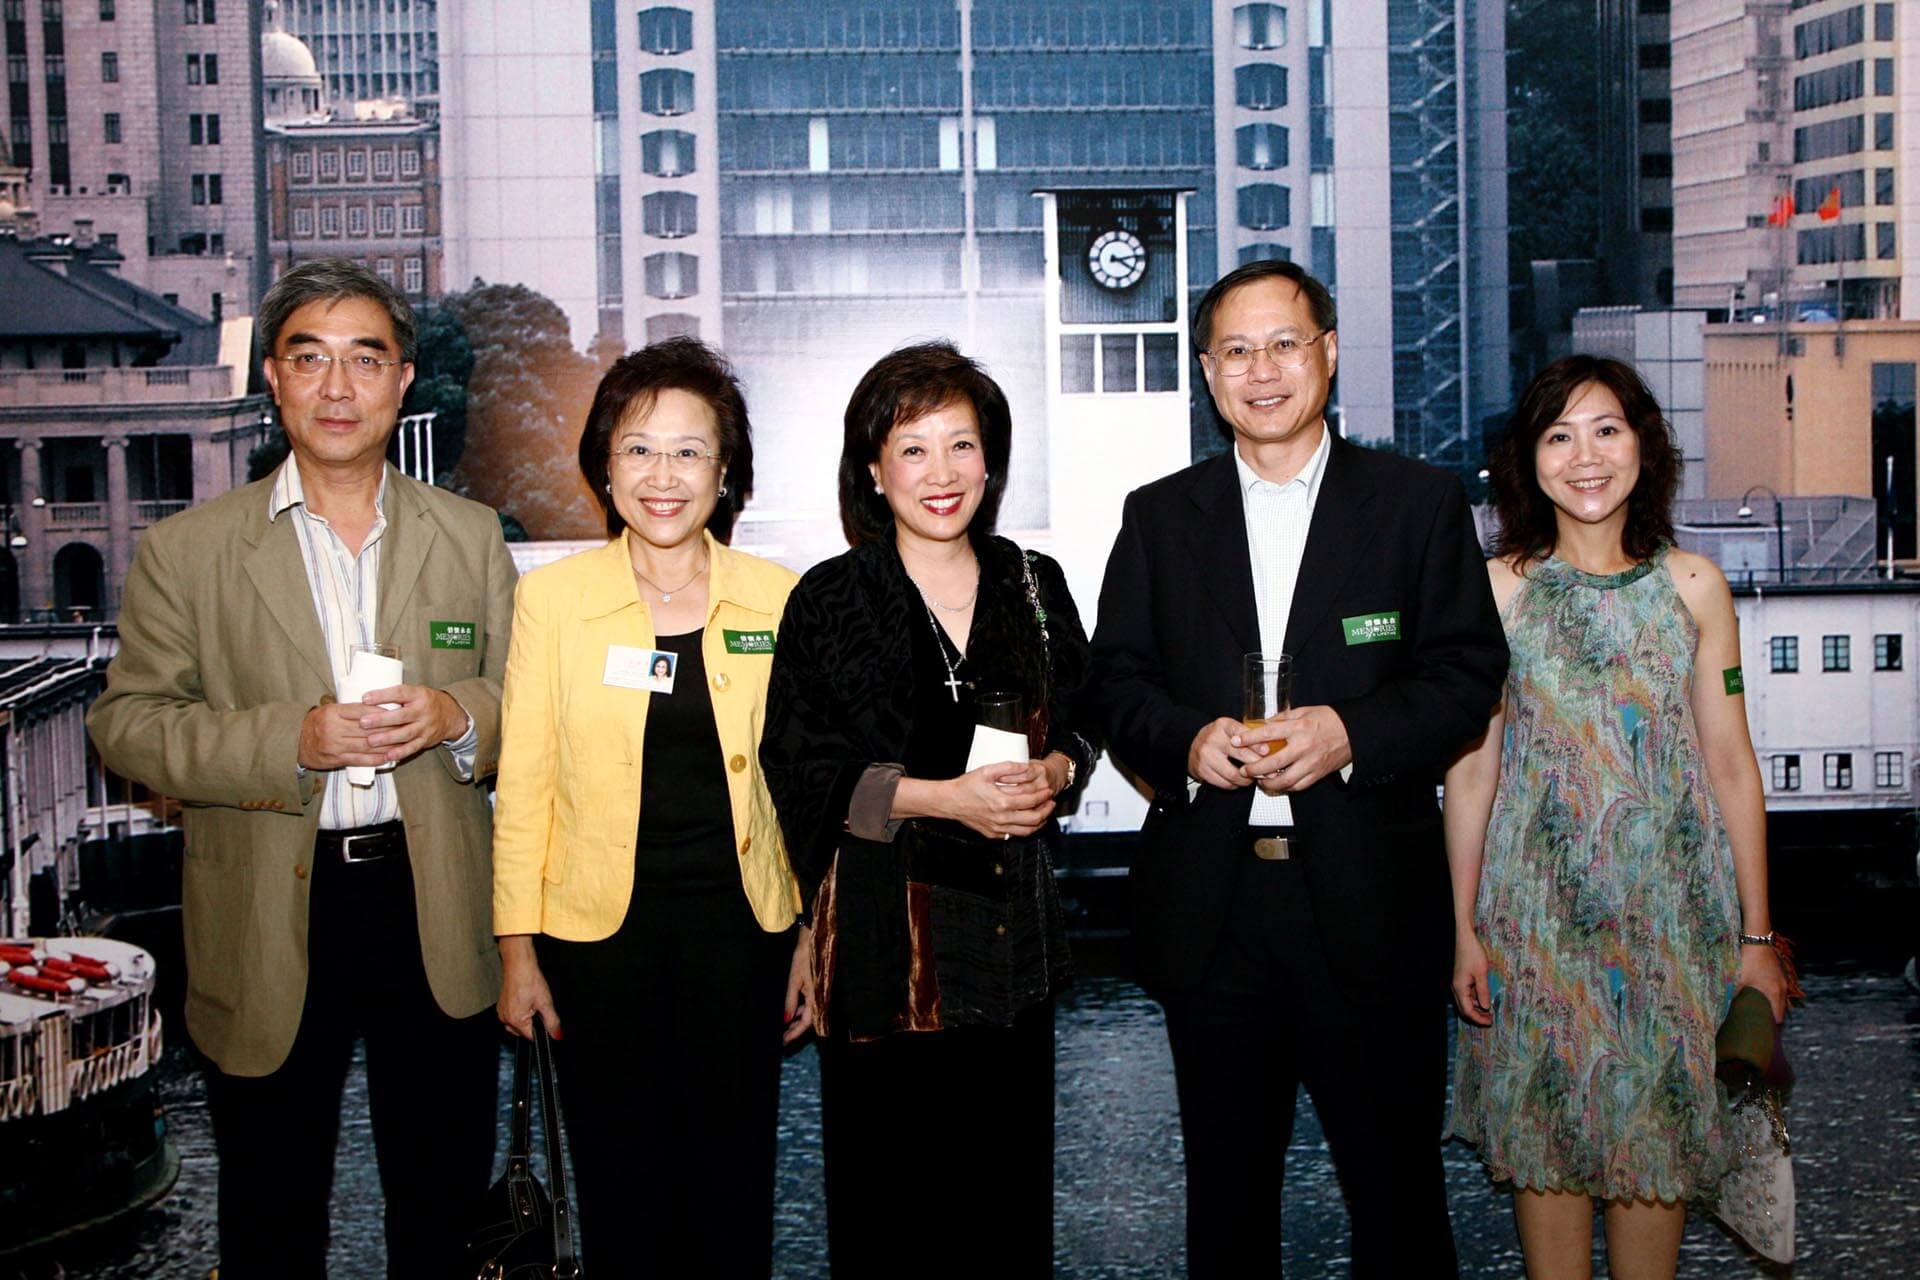 Ms. Hon Miriam Lau GBS JP (Member of Legislative Council), Dr. Rosanna Wong DBE JP (Chairman of the Education Commission), Mr. Alan Wong JP (Commissioner for Transport) and Ms. Cathy Chu JP (Deputy Secretary for Transport and Housing [Transport]) visited in November 2006